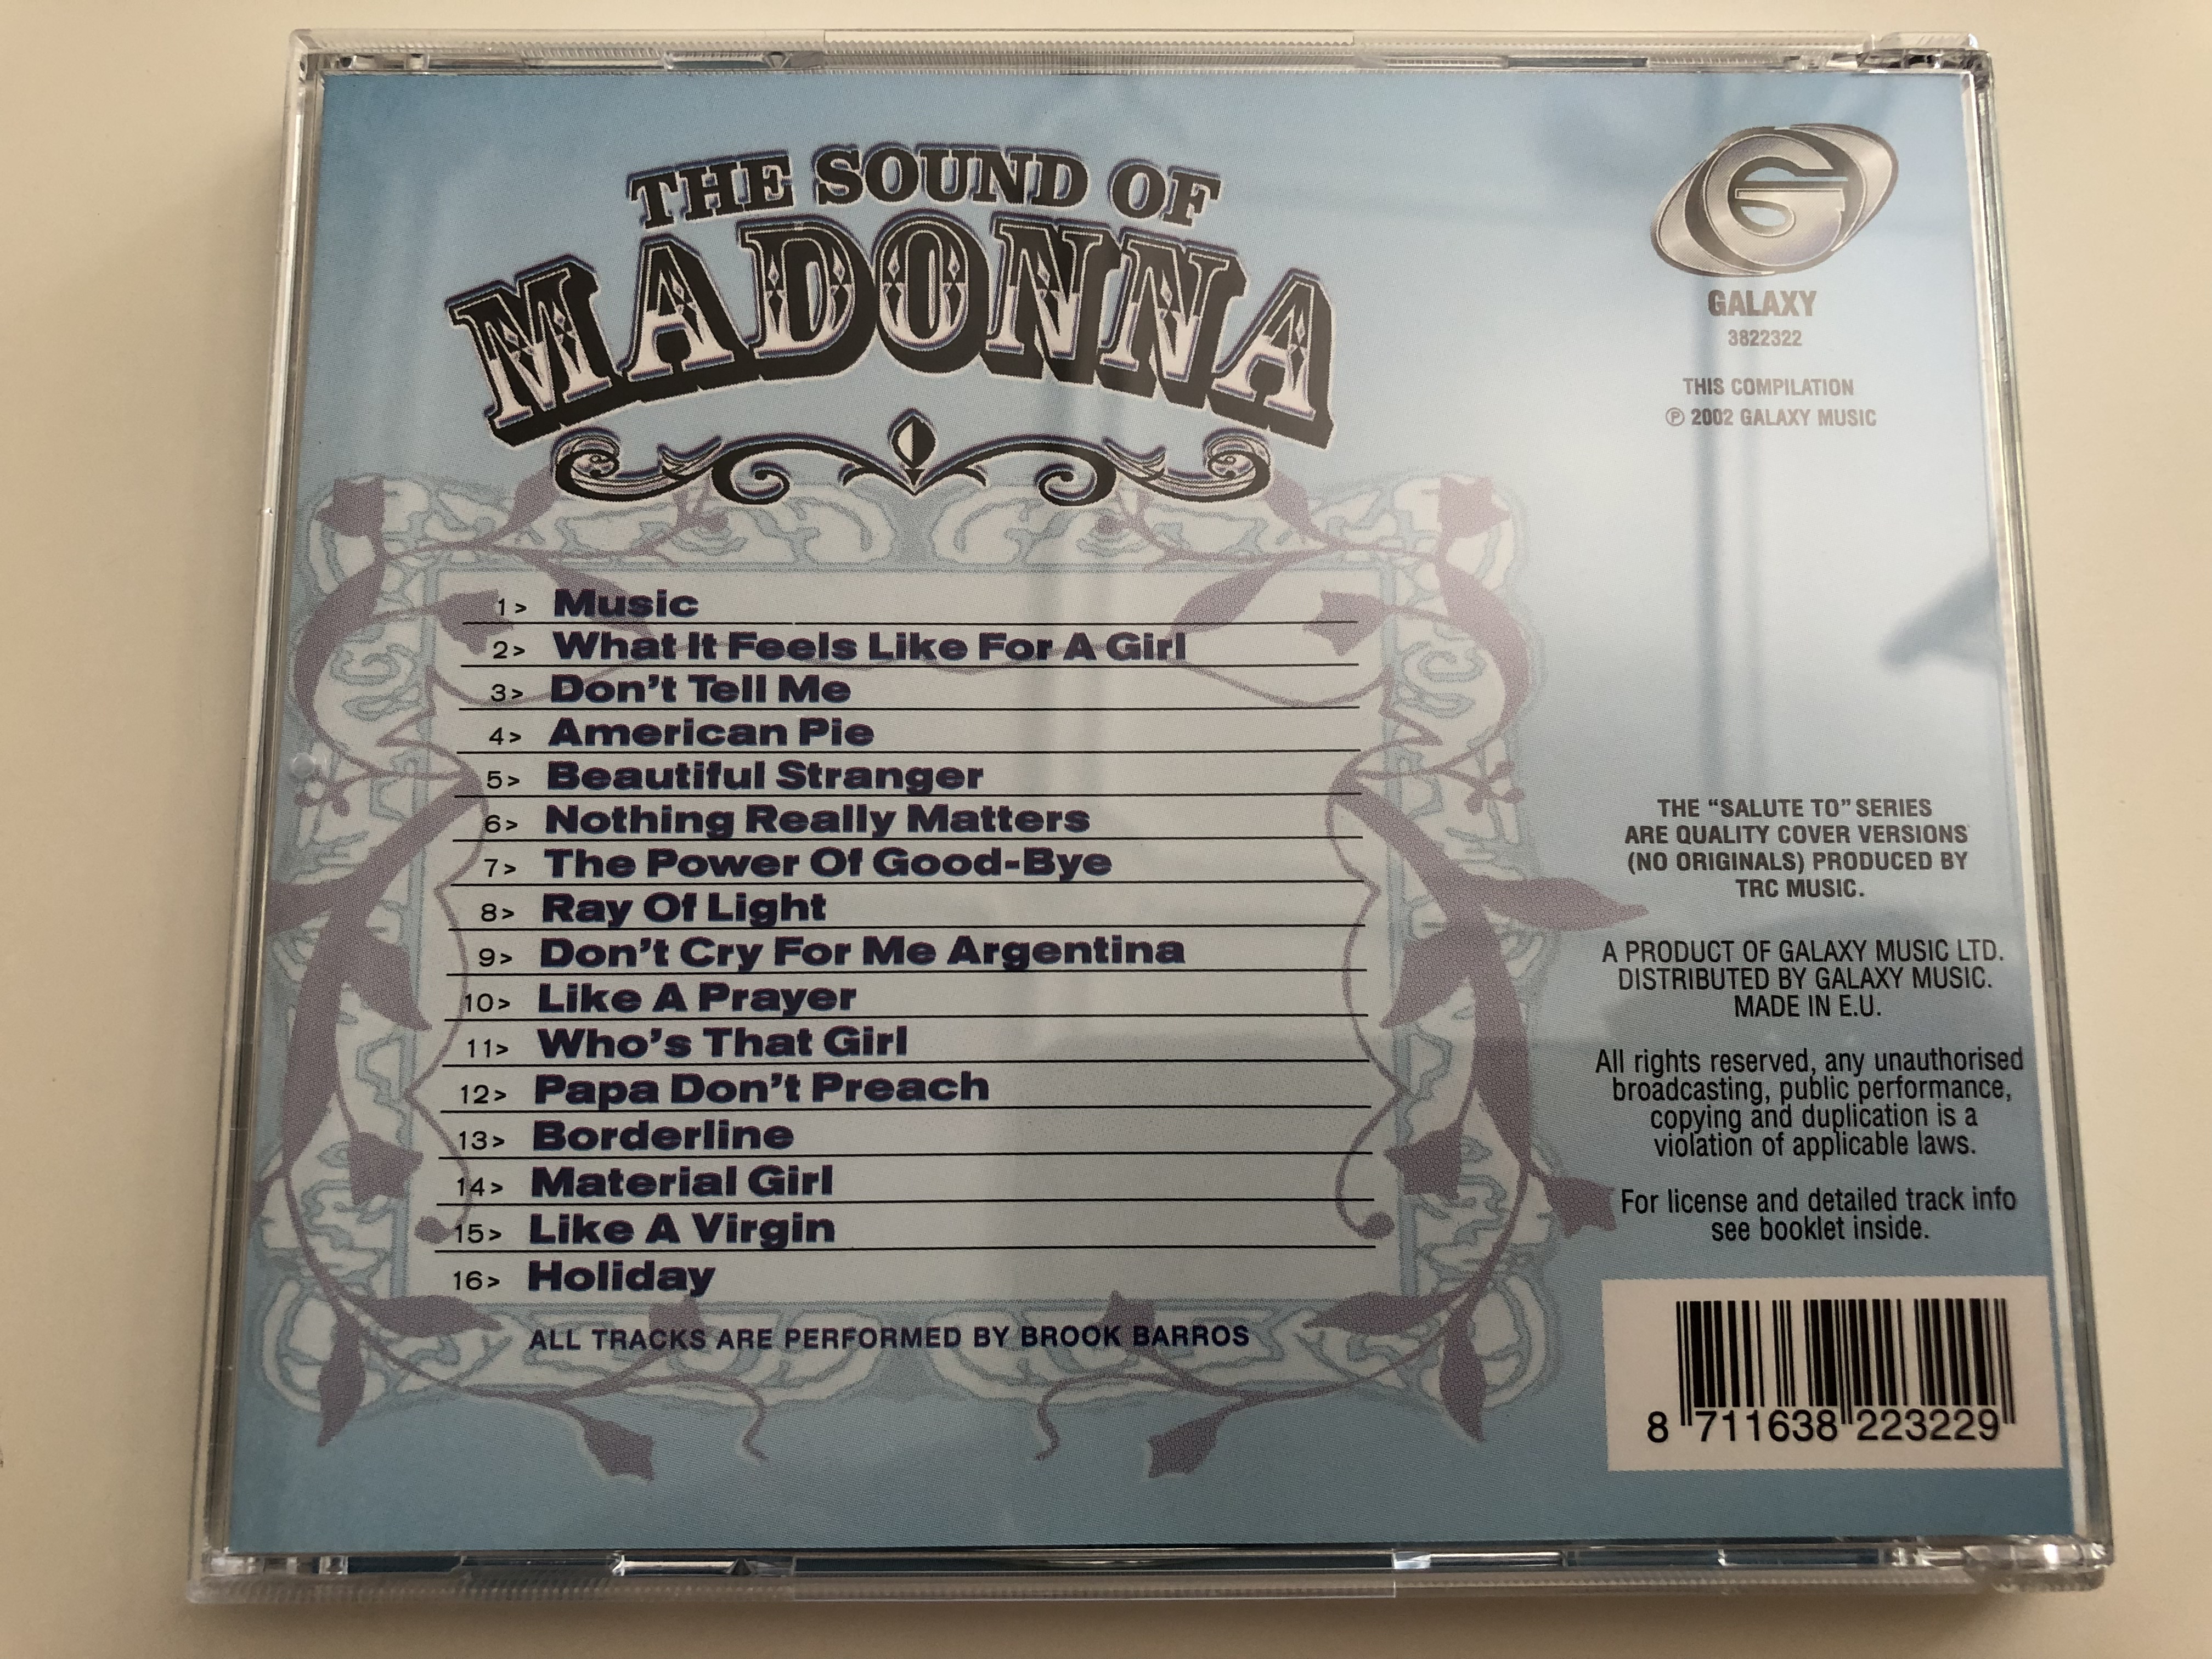 the-sound-of-madonna-music-ray-of-light-who-s-that-girl-frozen-and-many-more-performed-by-brook-barros-audio-cd-2002-galaxy-3822322-5-.jpg